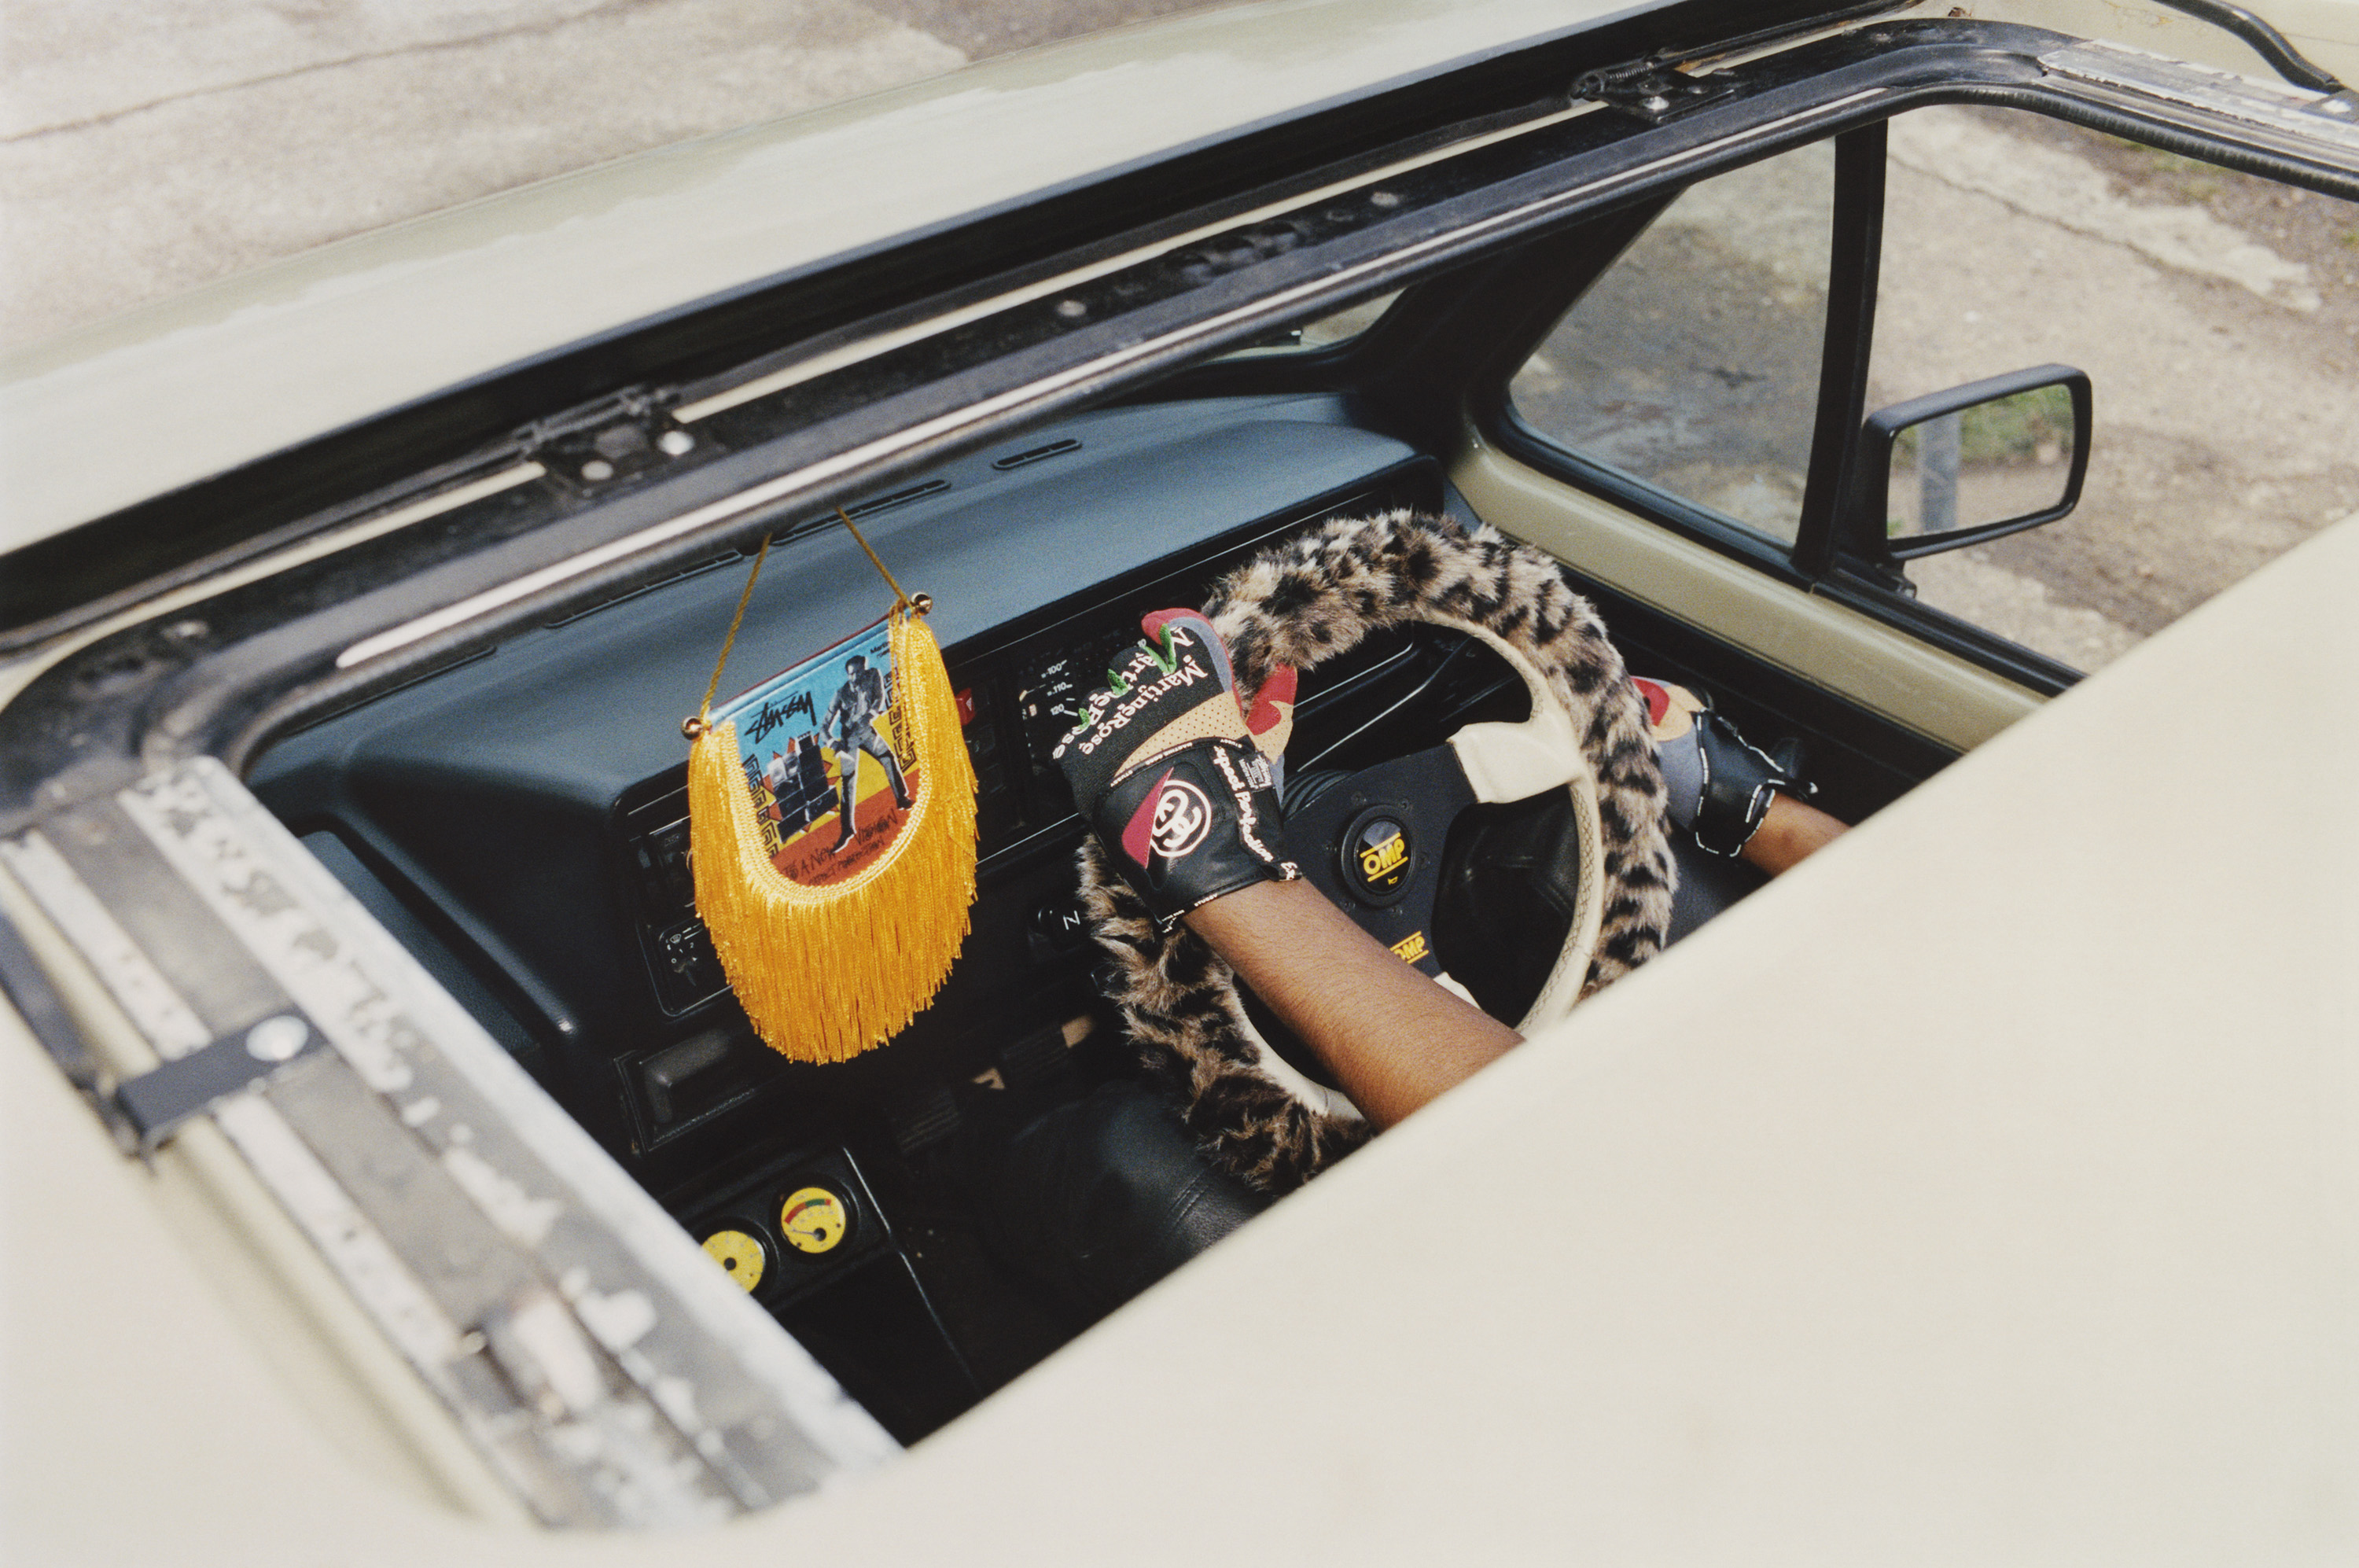 Stüssy x Martine Rose Launch Car-Centric Collaboration - SLN Official